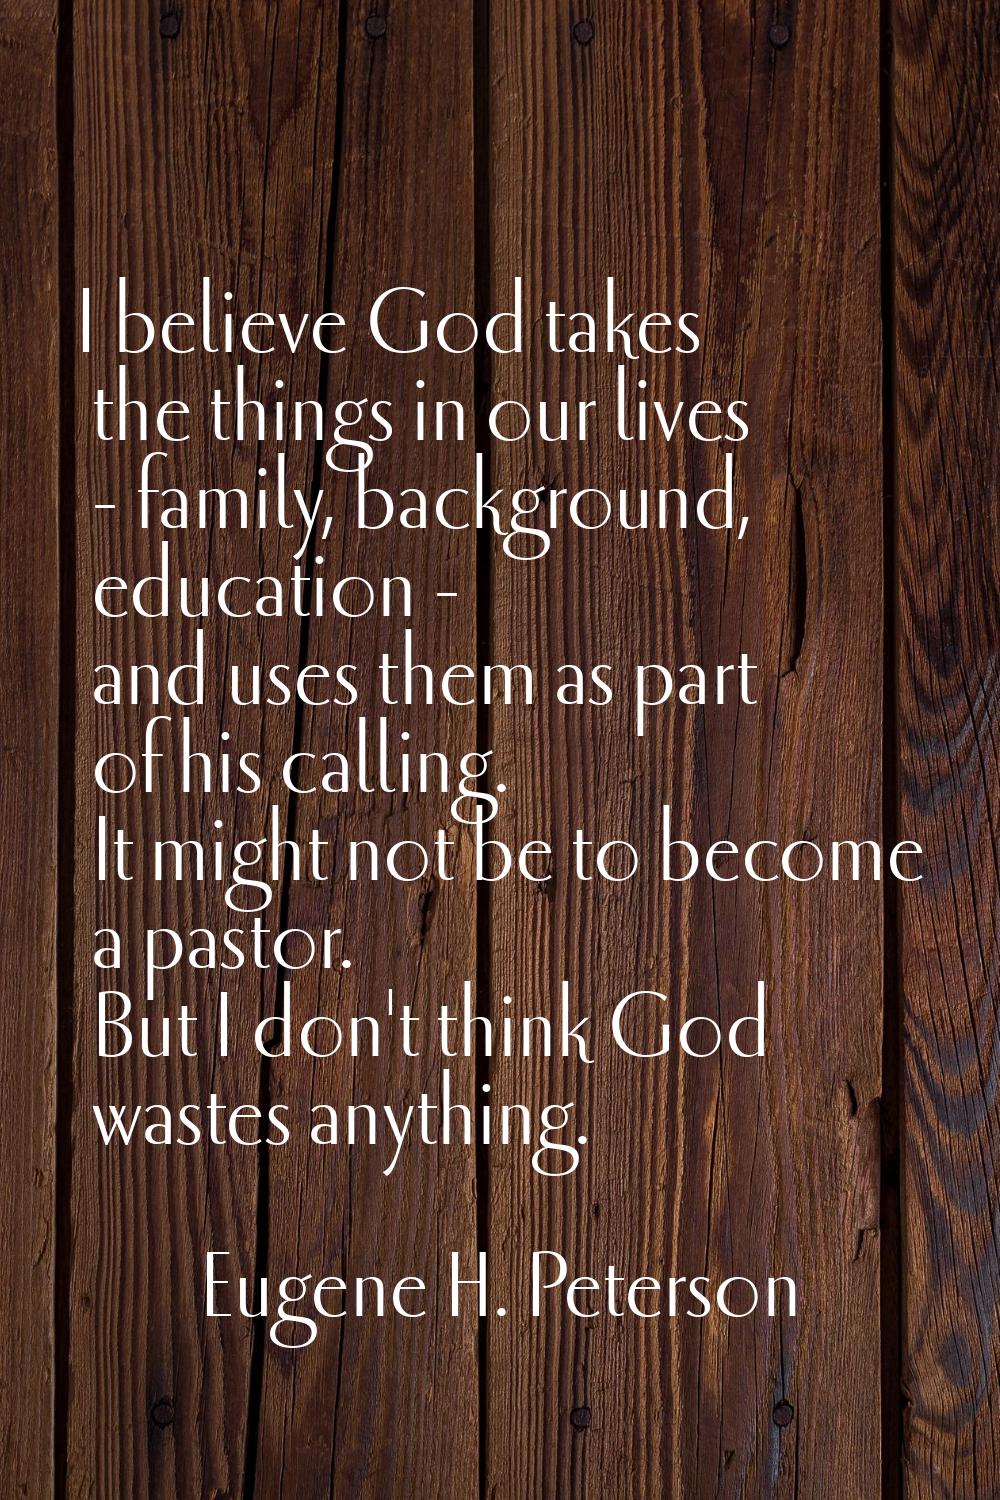 I believe God takes the things in our lives - family, background, education - and uses them as part